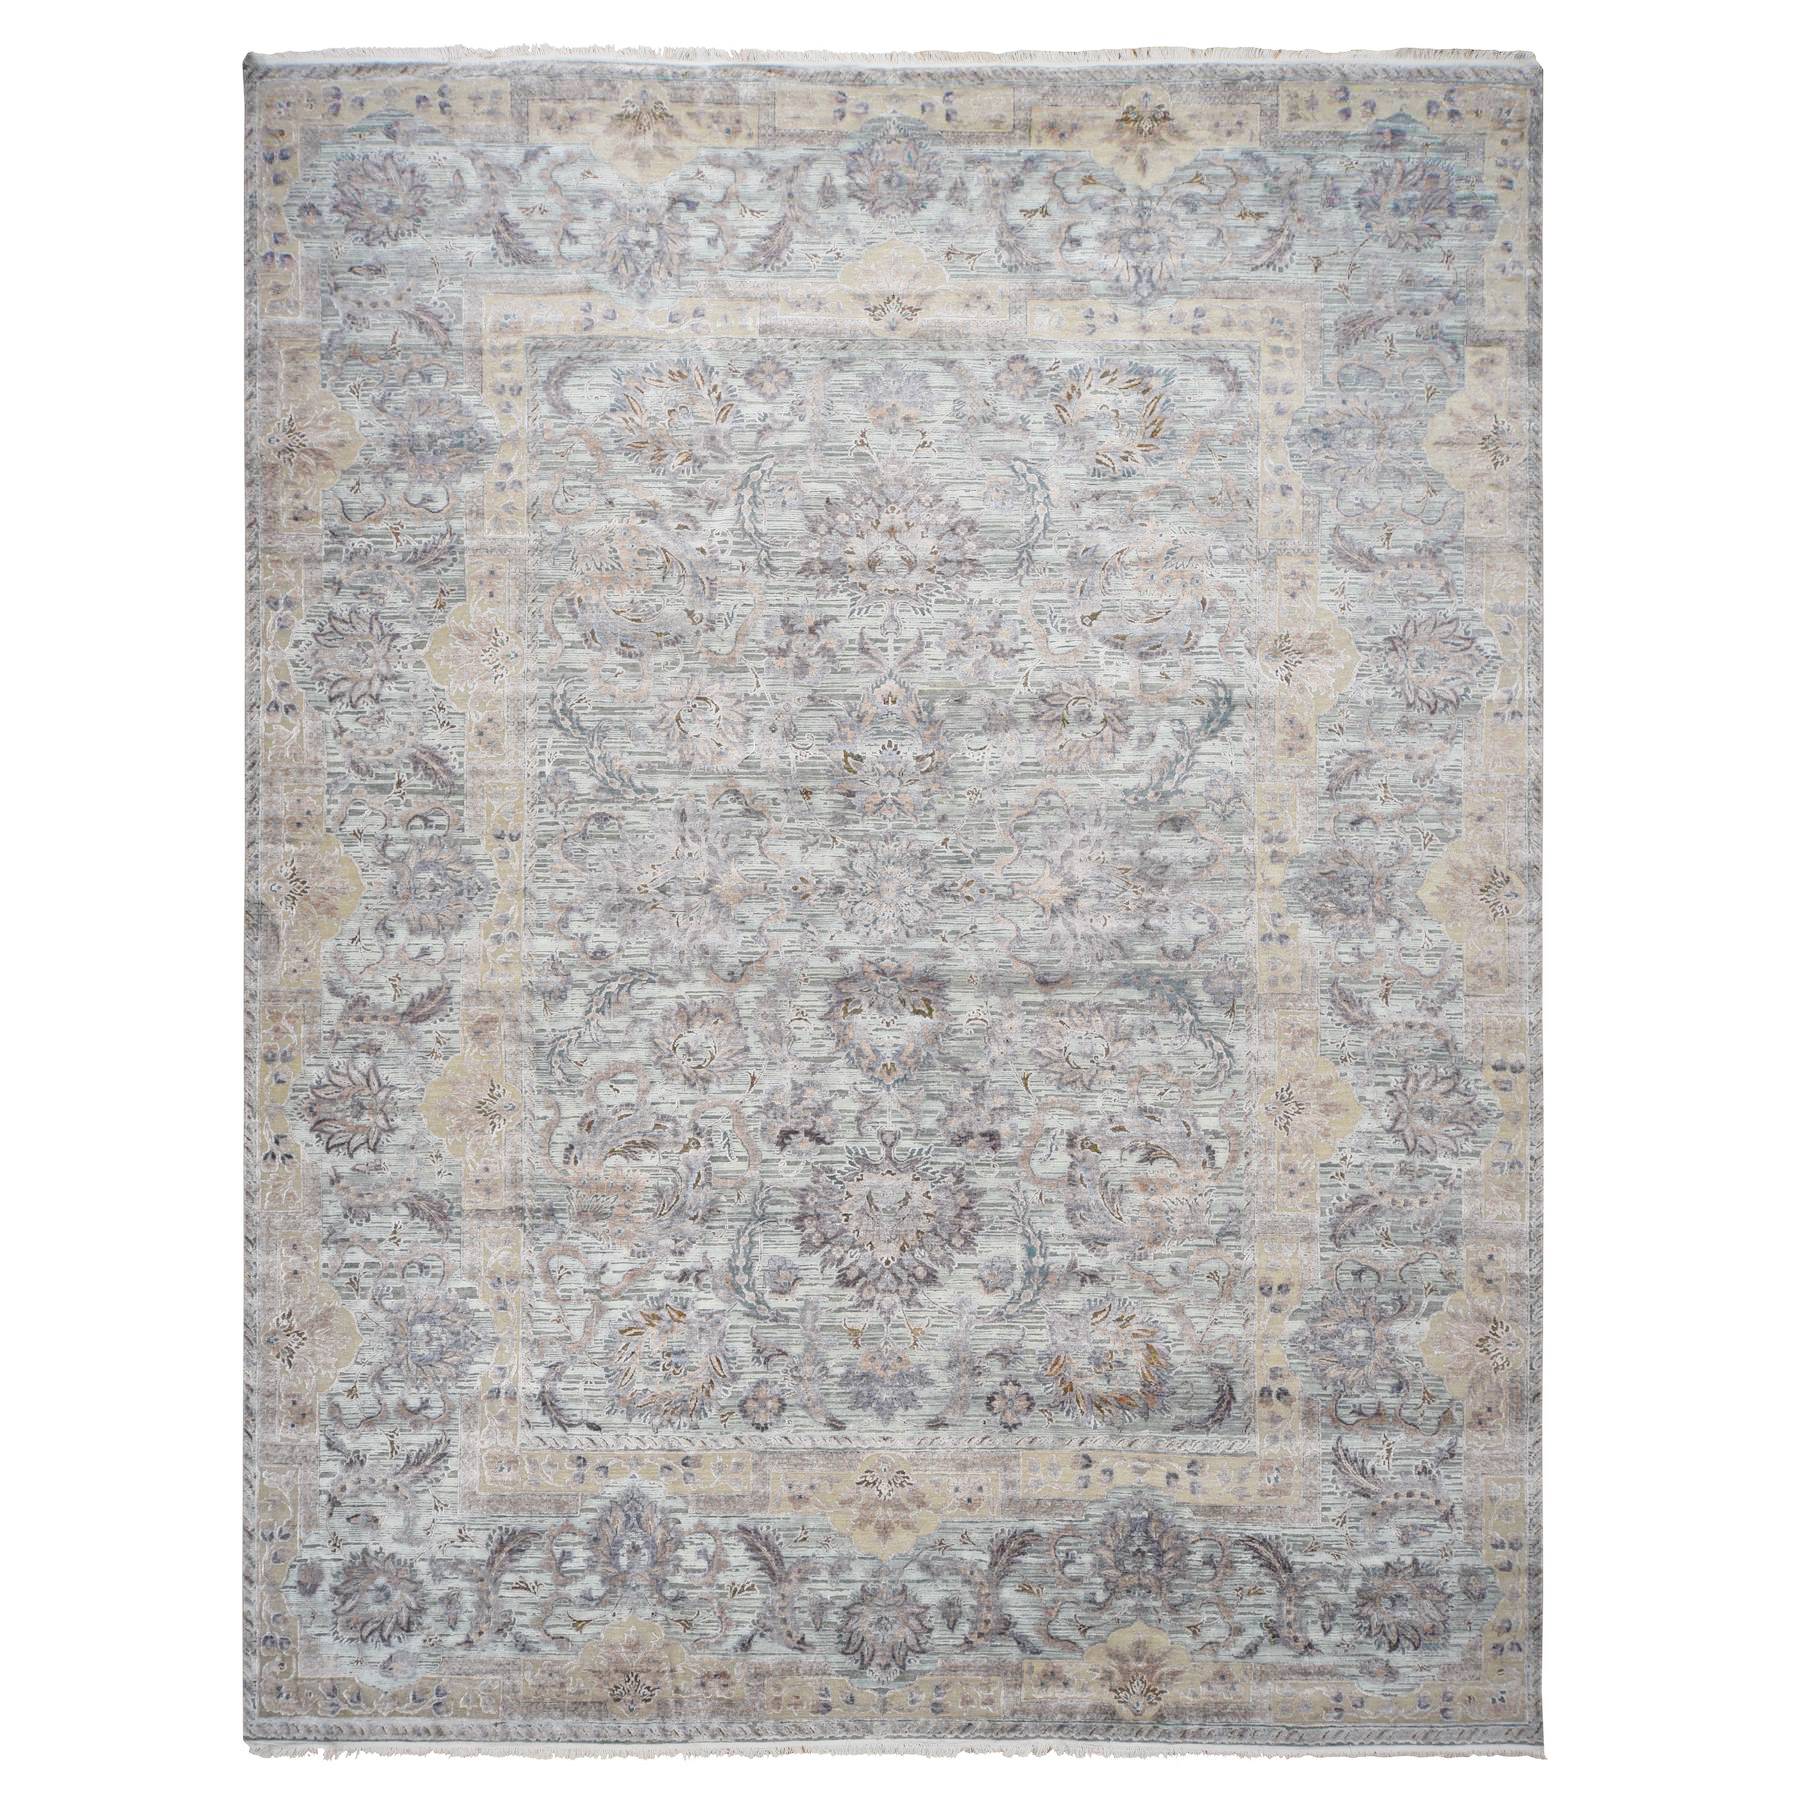  Silk Hand-Knotted Area Rug 11'8